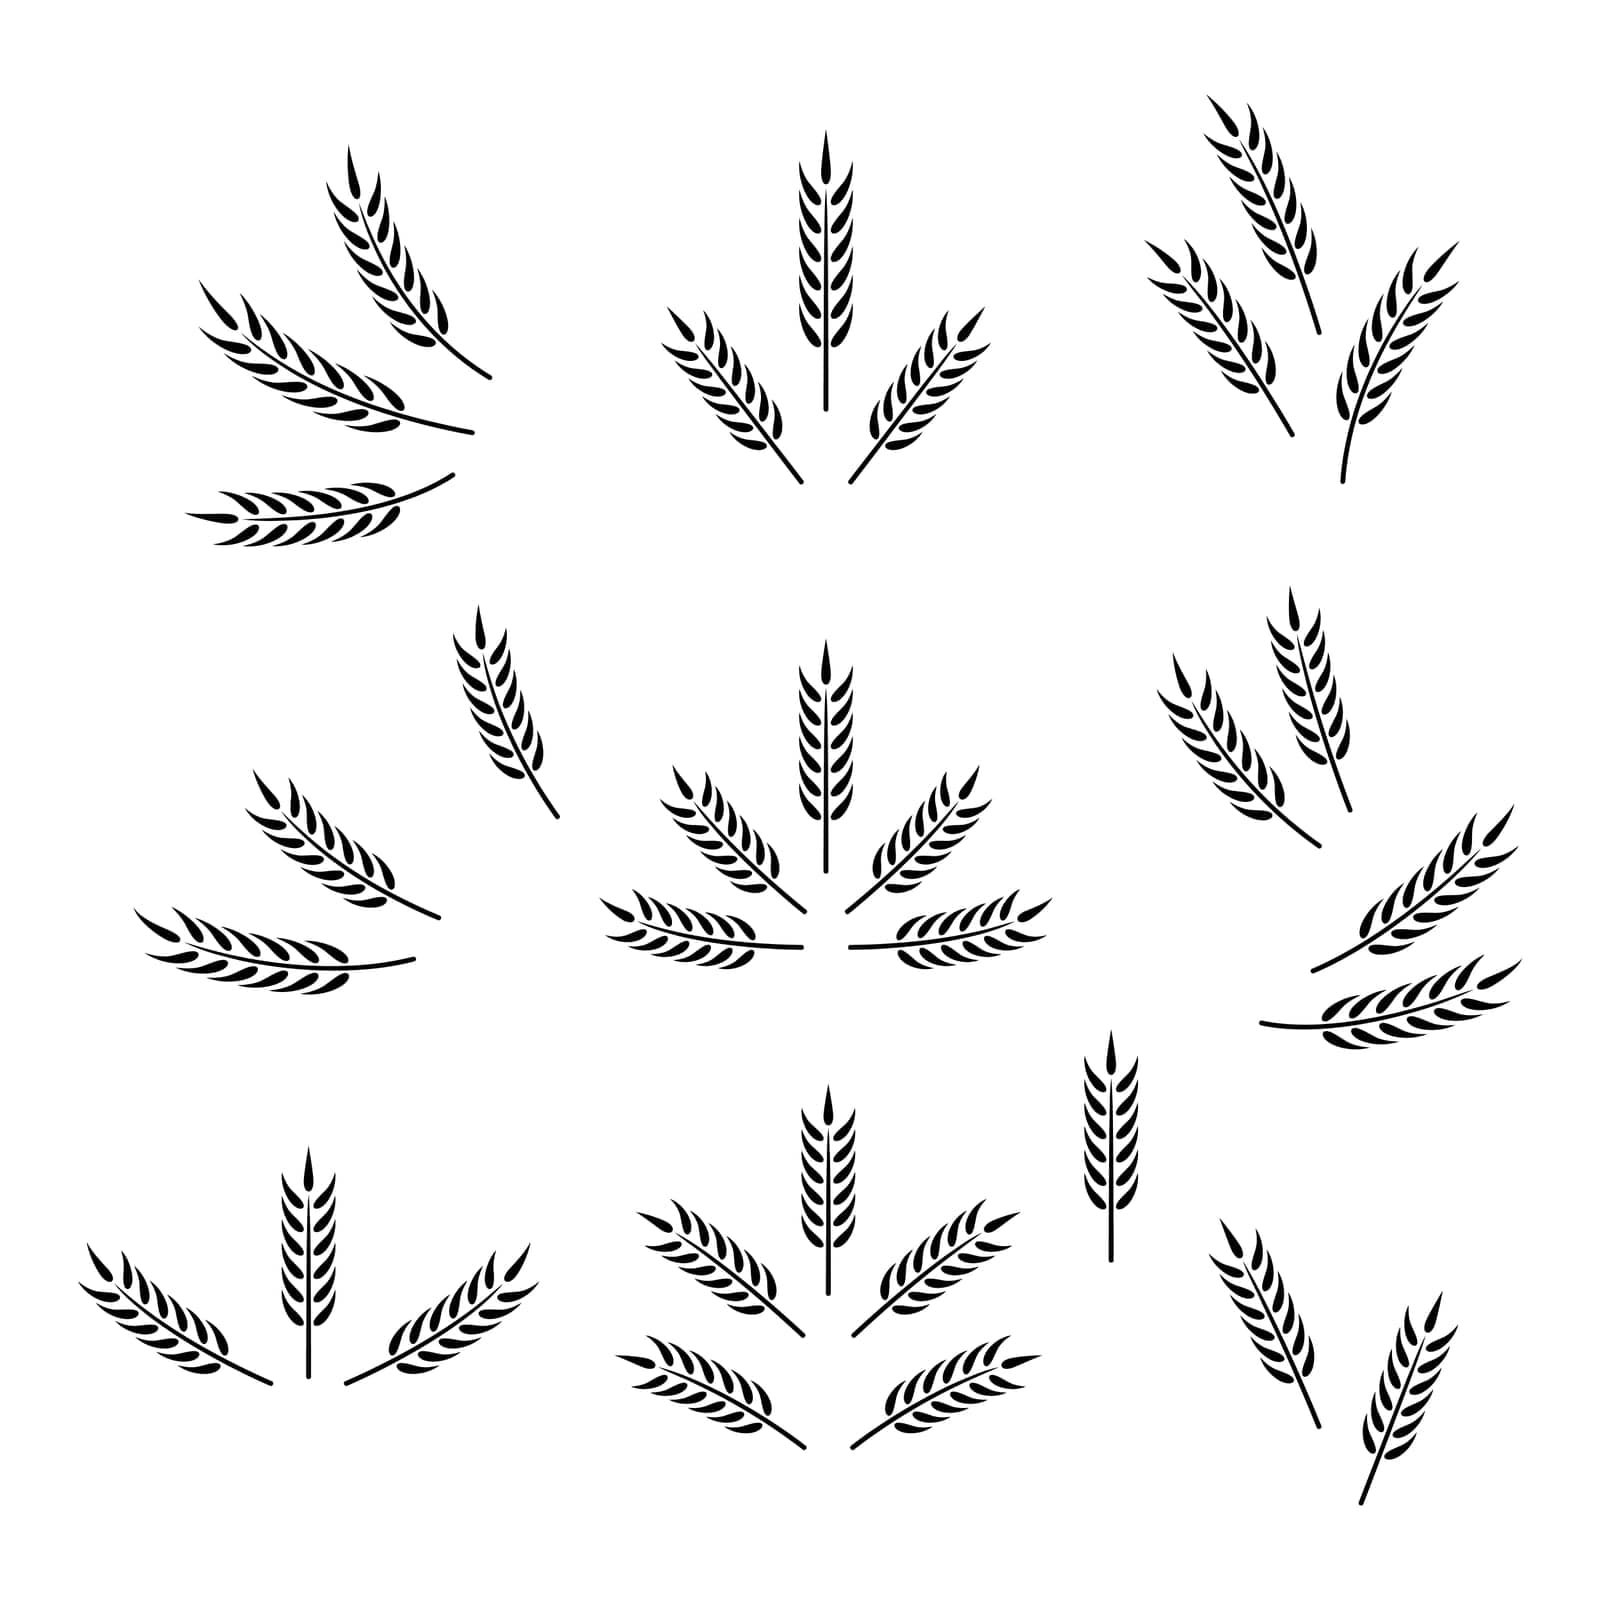 Flat Vector Agriculture Wheat Icon Set Isolated. Organic Wheat and Rice Ears. Design Template for Bread, Beer Logo, Packaging, Labels for Farming, Organic Produce, and Food Industry Concept.